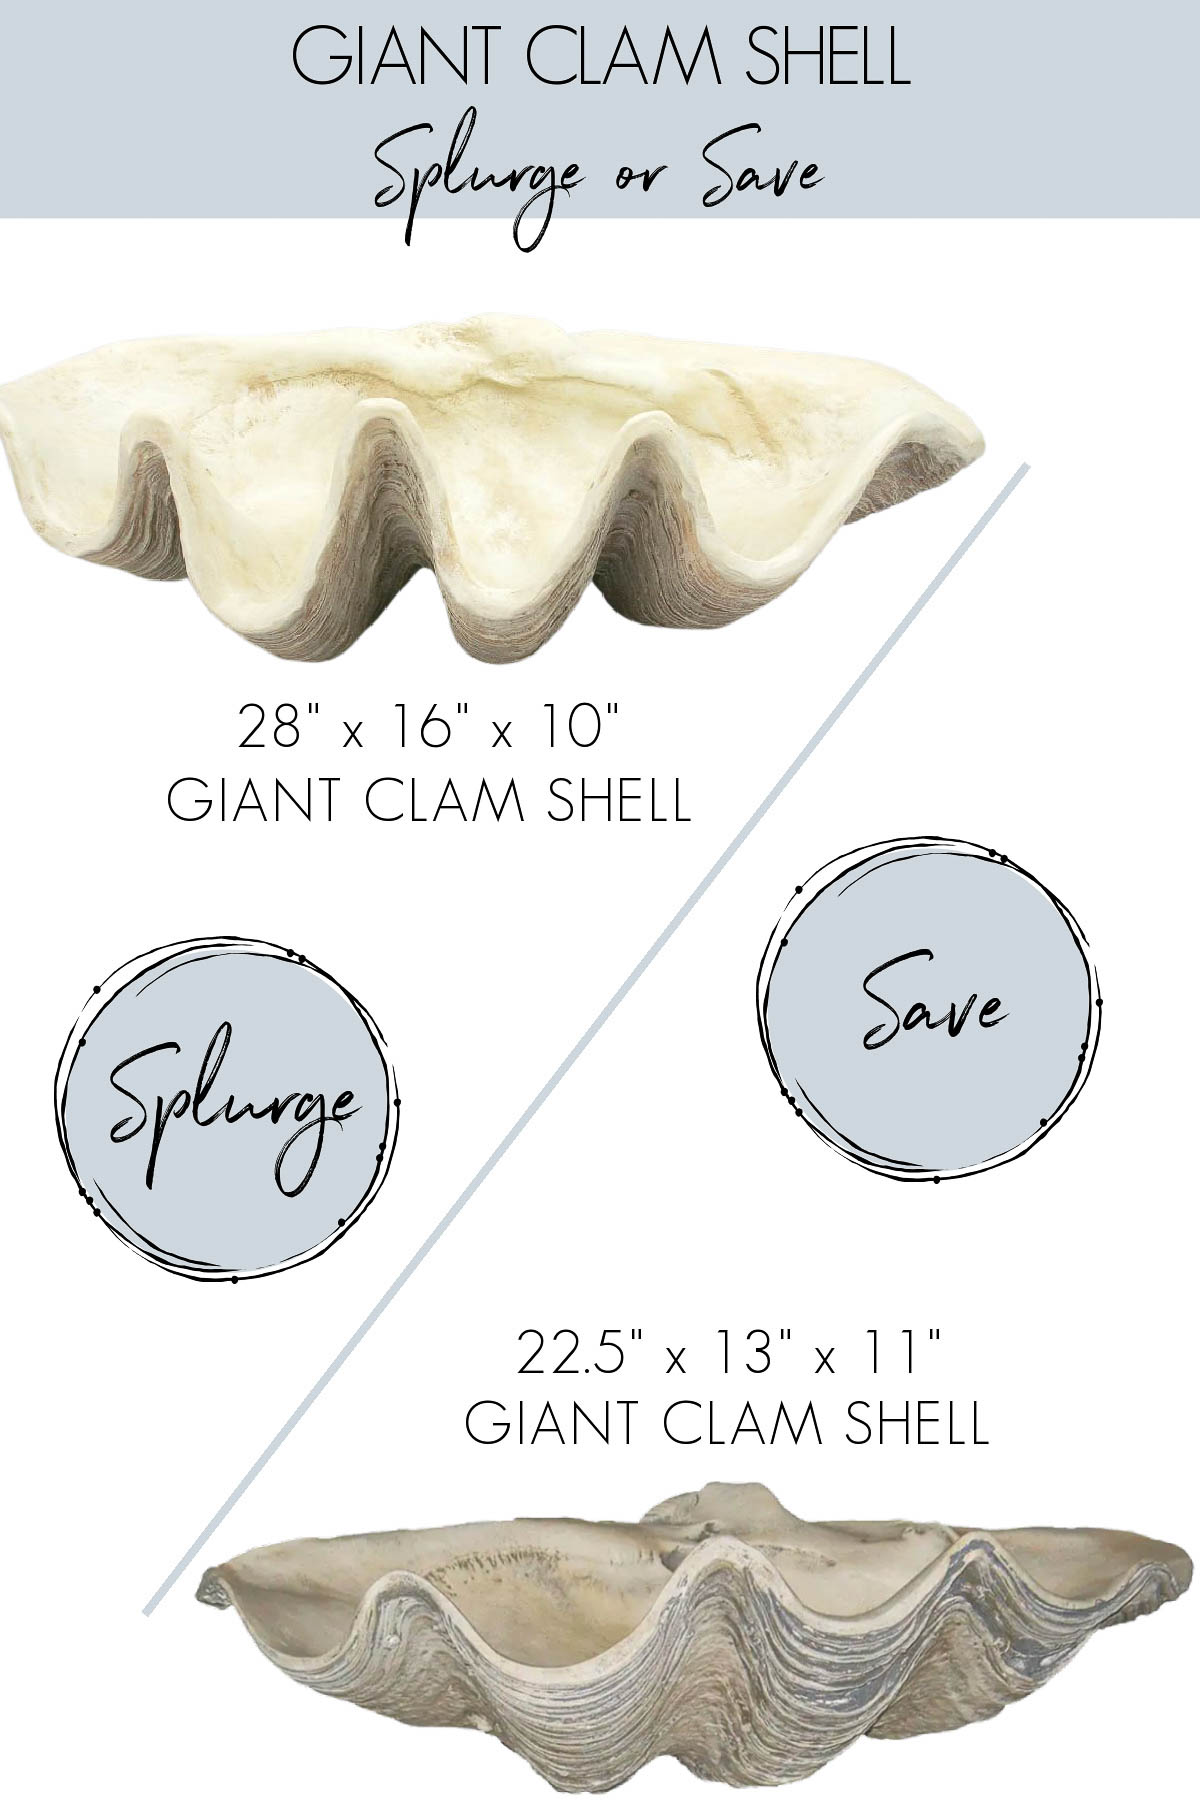 Giant clam shell - designer version and look for less